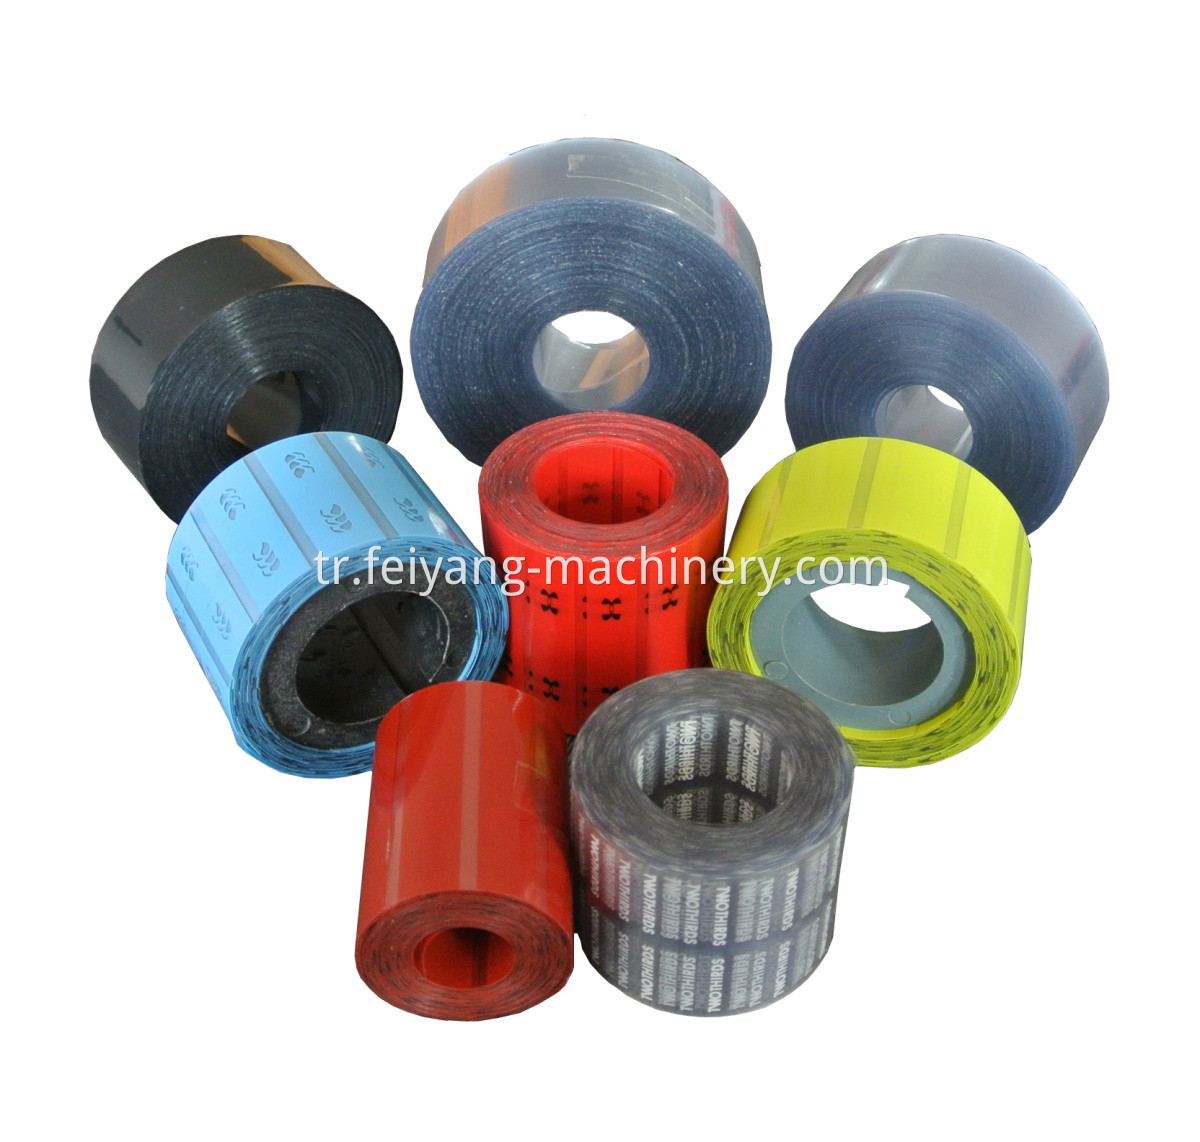 shoelace multi color tipping film